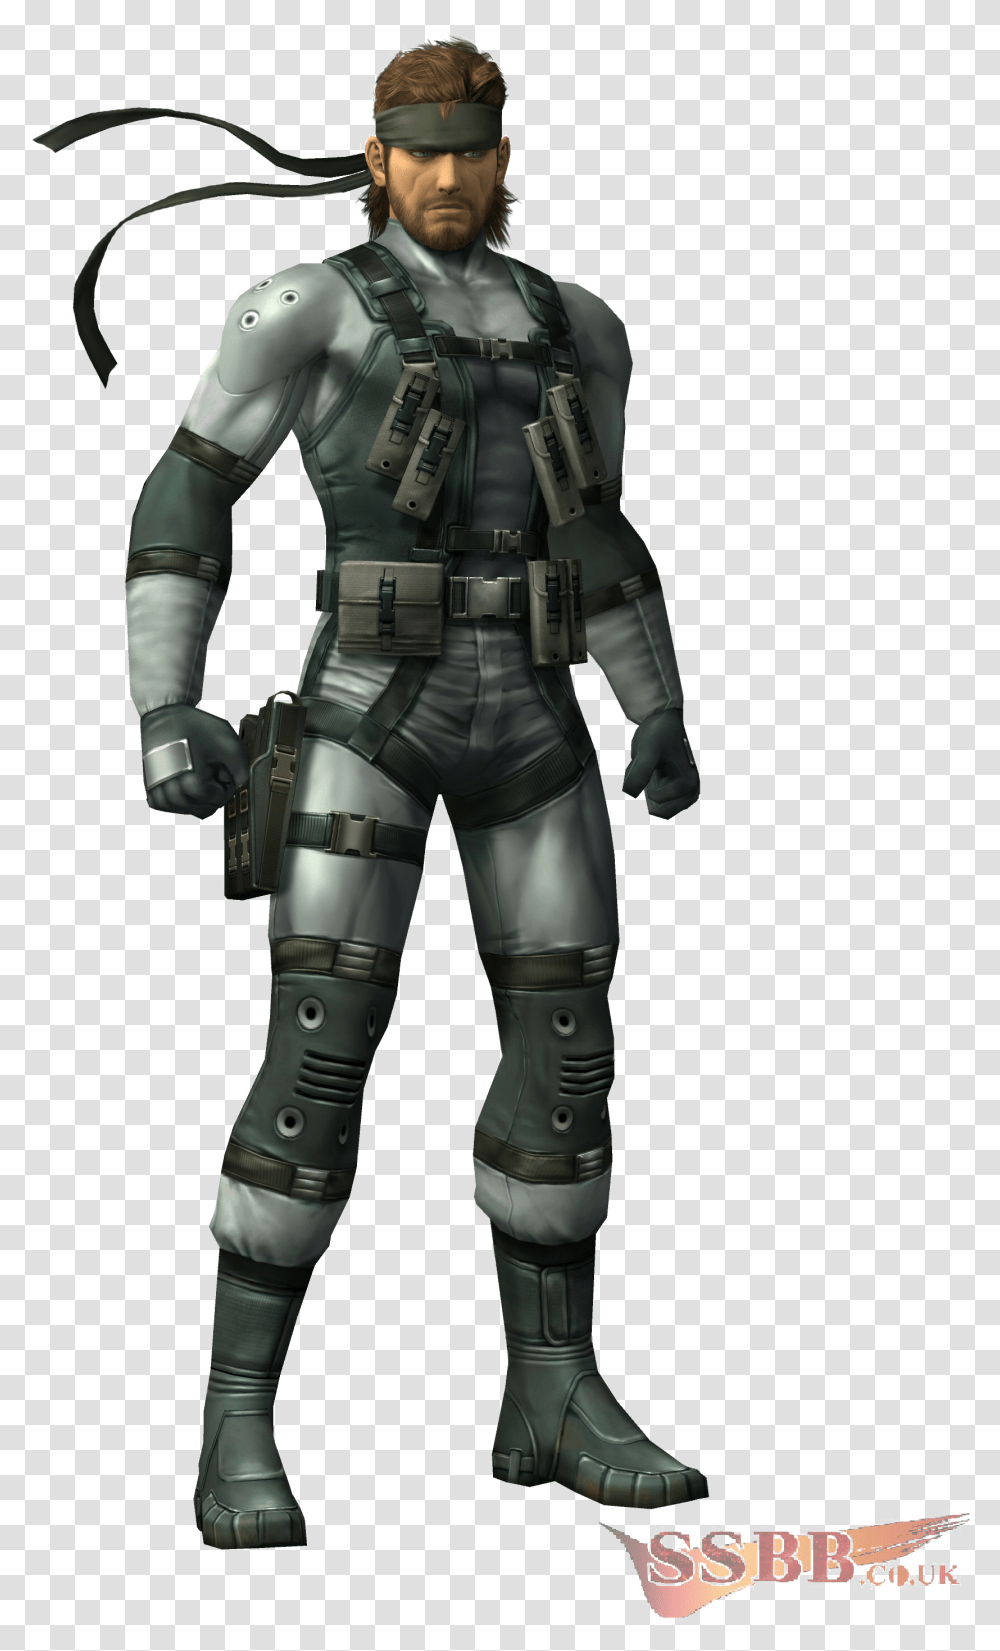 Solid Snake Image Solid Metal Gear Snake, Armor, Person, Human, Robot Transparent Png